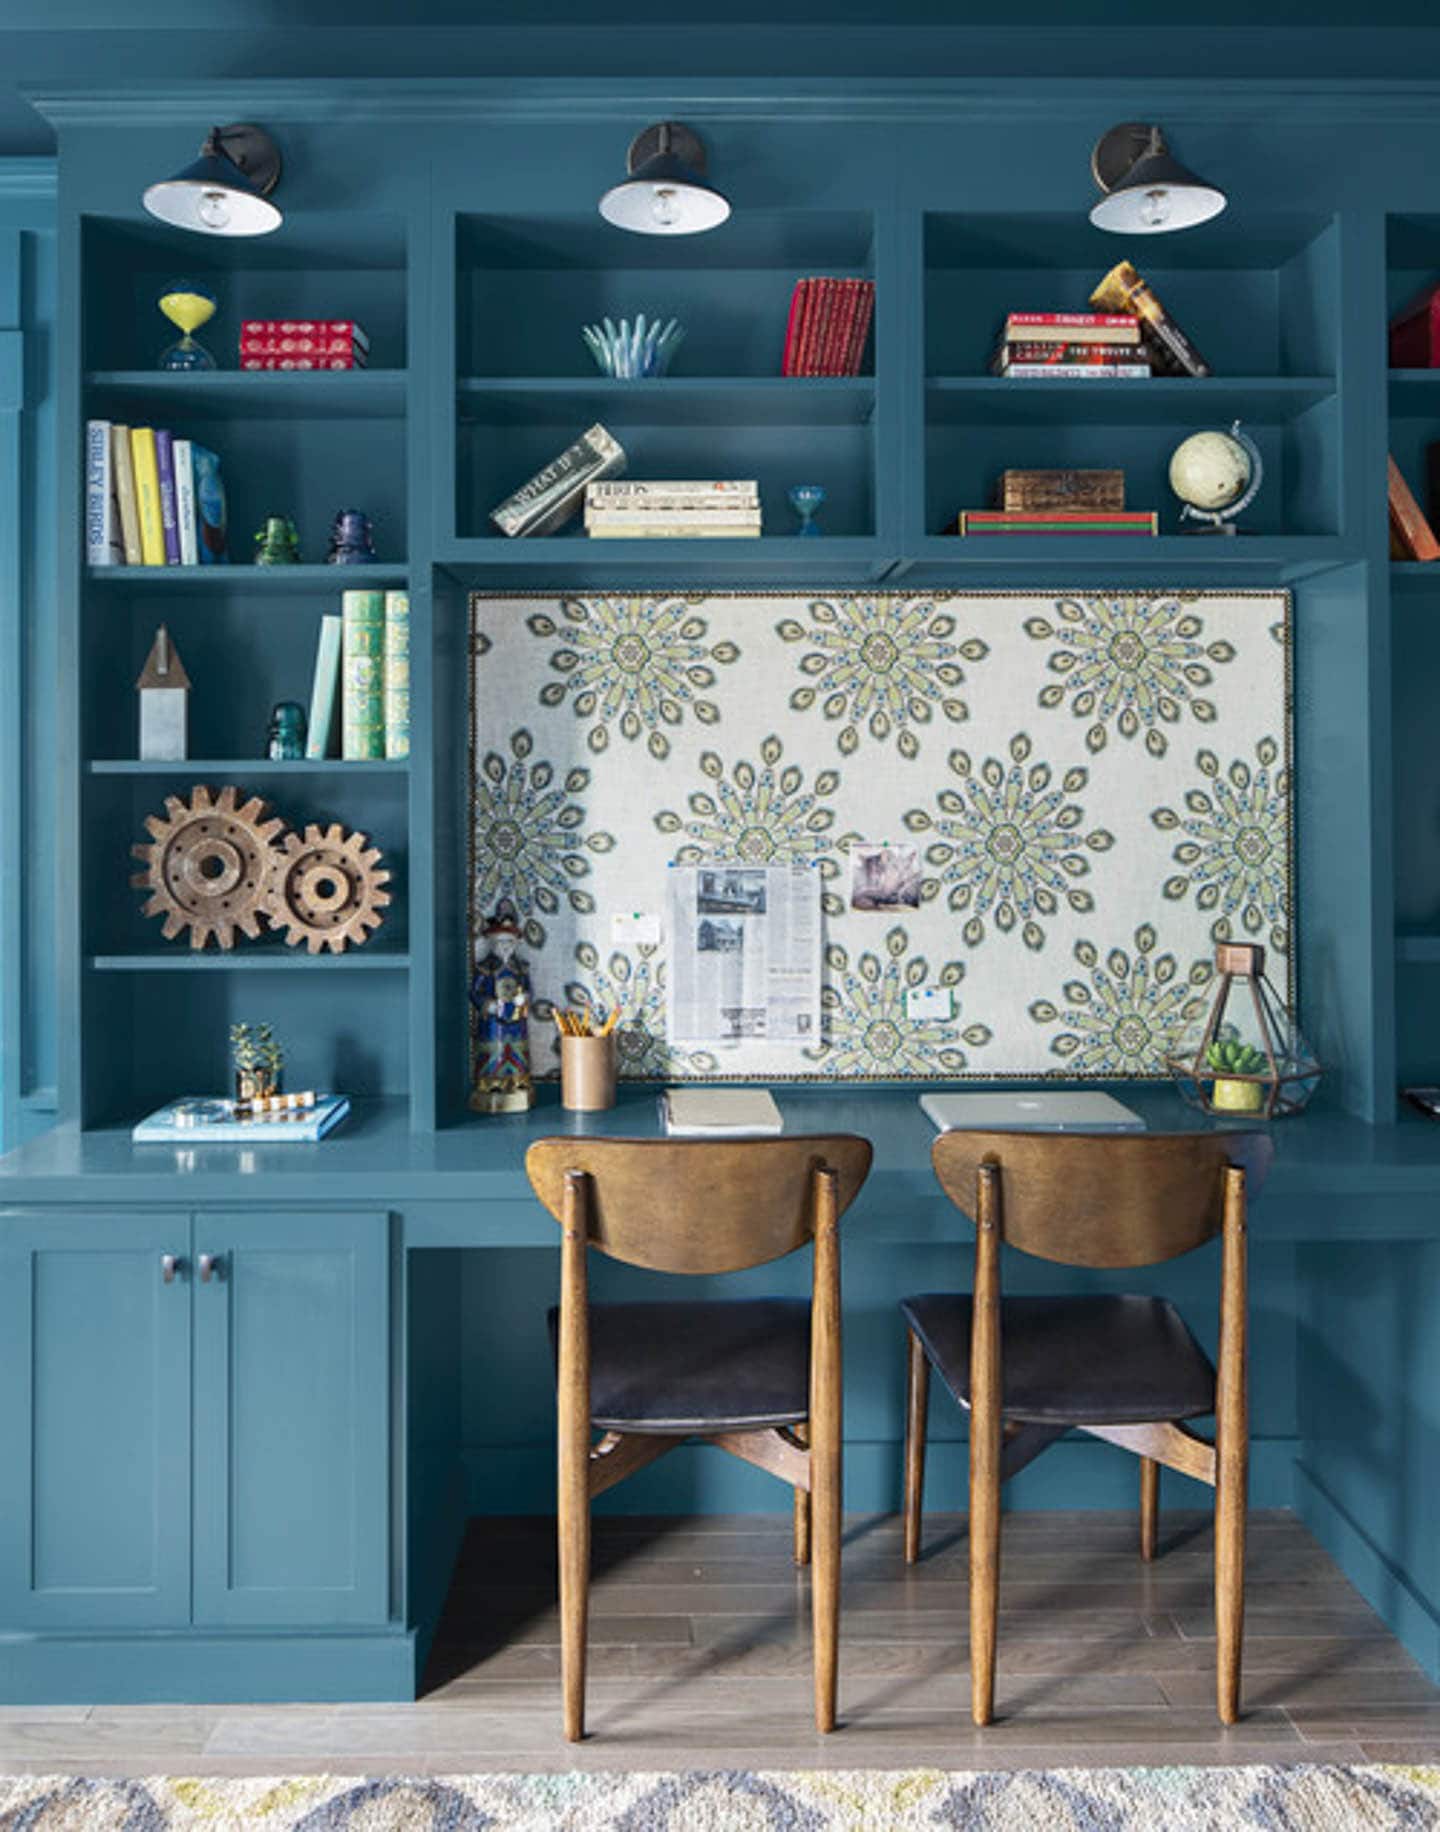 Teal shelves with a built-in desk with an upholstered bulletin board above it